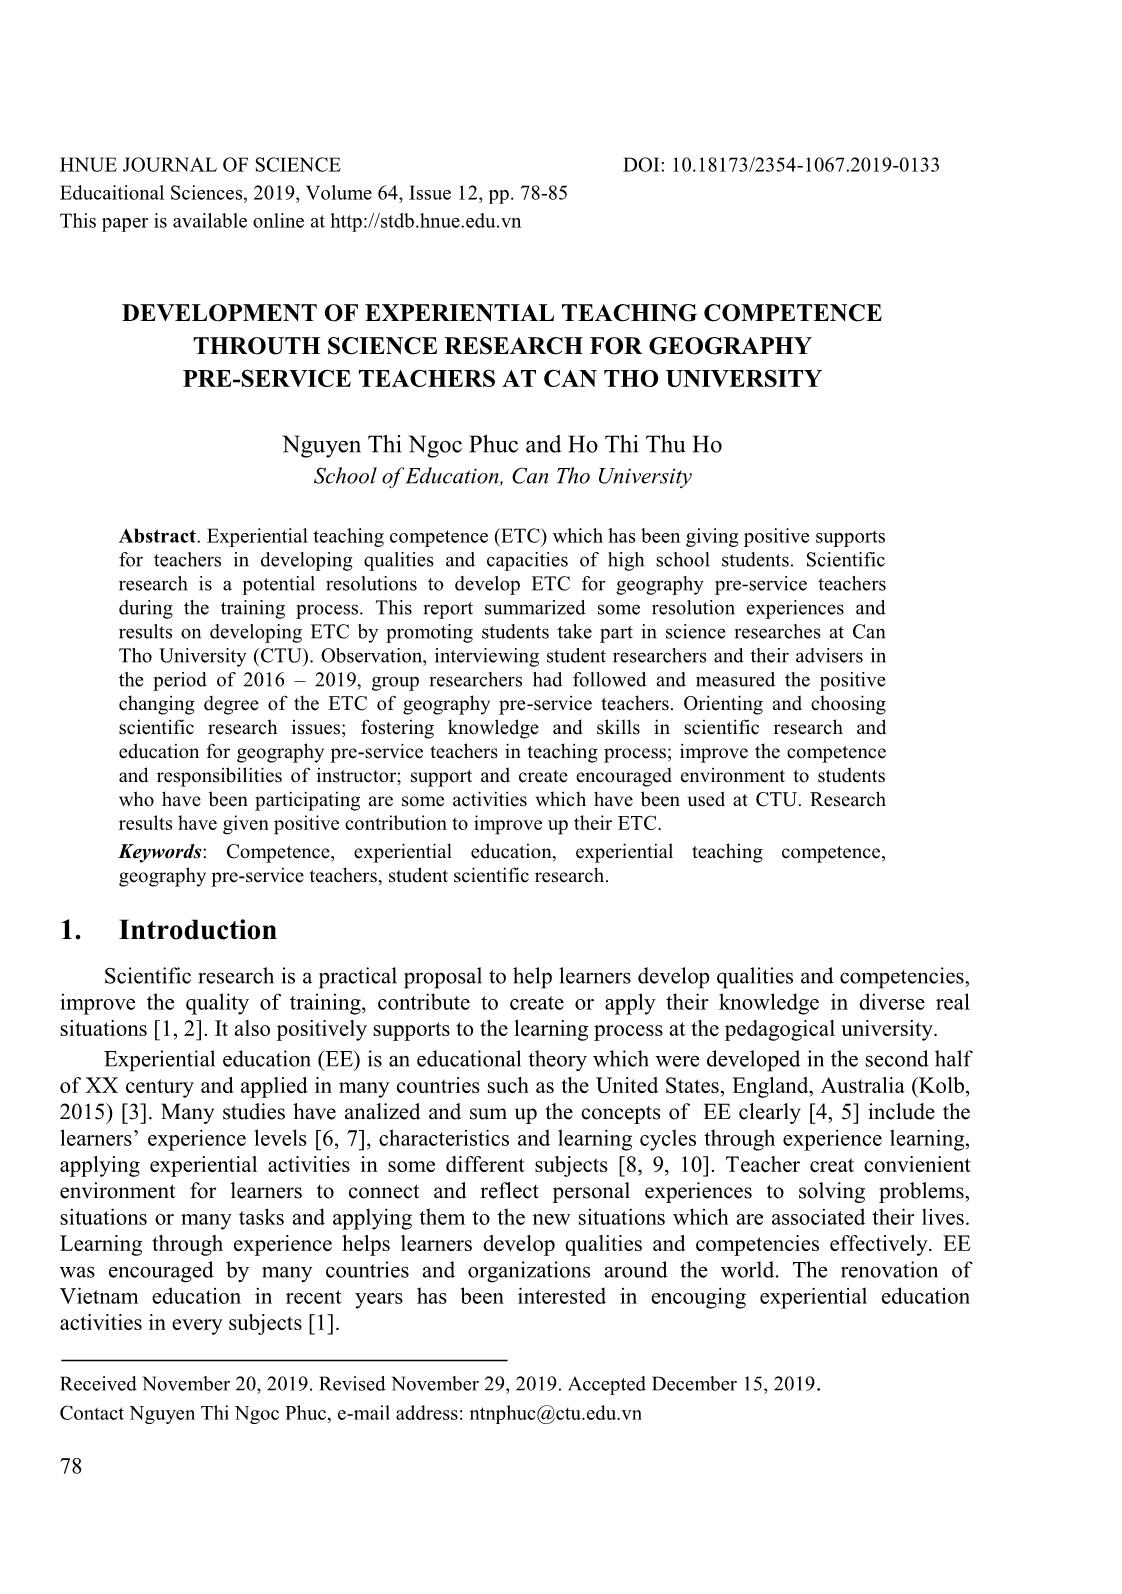 Development of experiential teaching competence throuth science research for geography pre-service teachers at can tho university trang 1